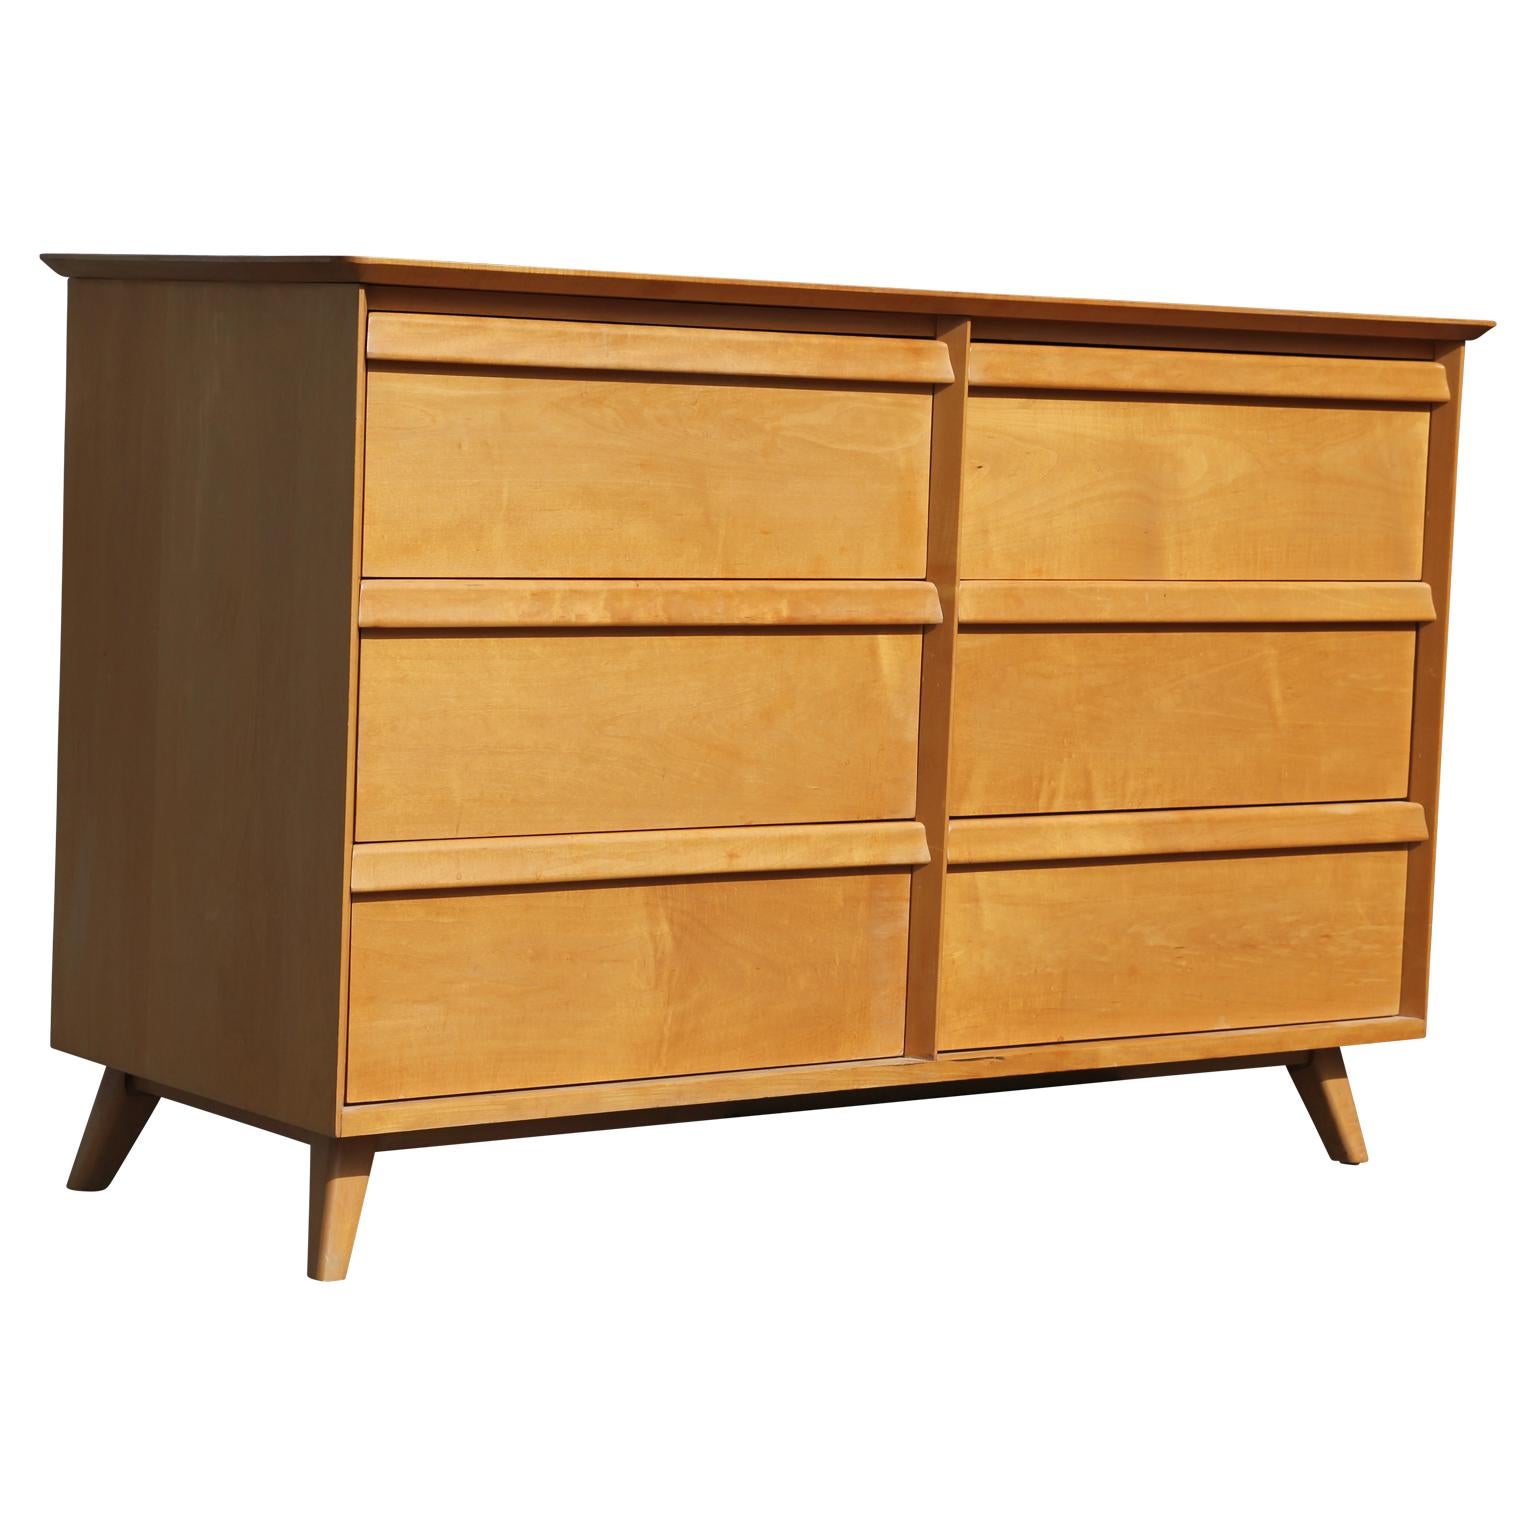 Fantastic birch Mid-Century Modern 6-drawer bachelor chest/dresser with louver style drawer pulls from Birchcraft by Baumritter.